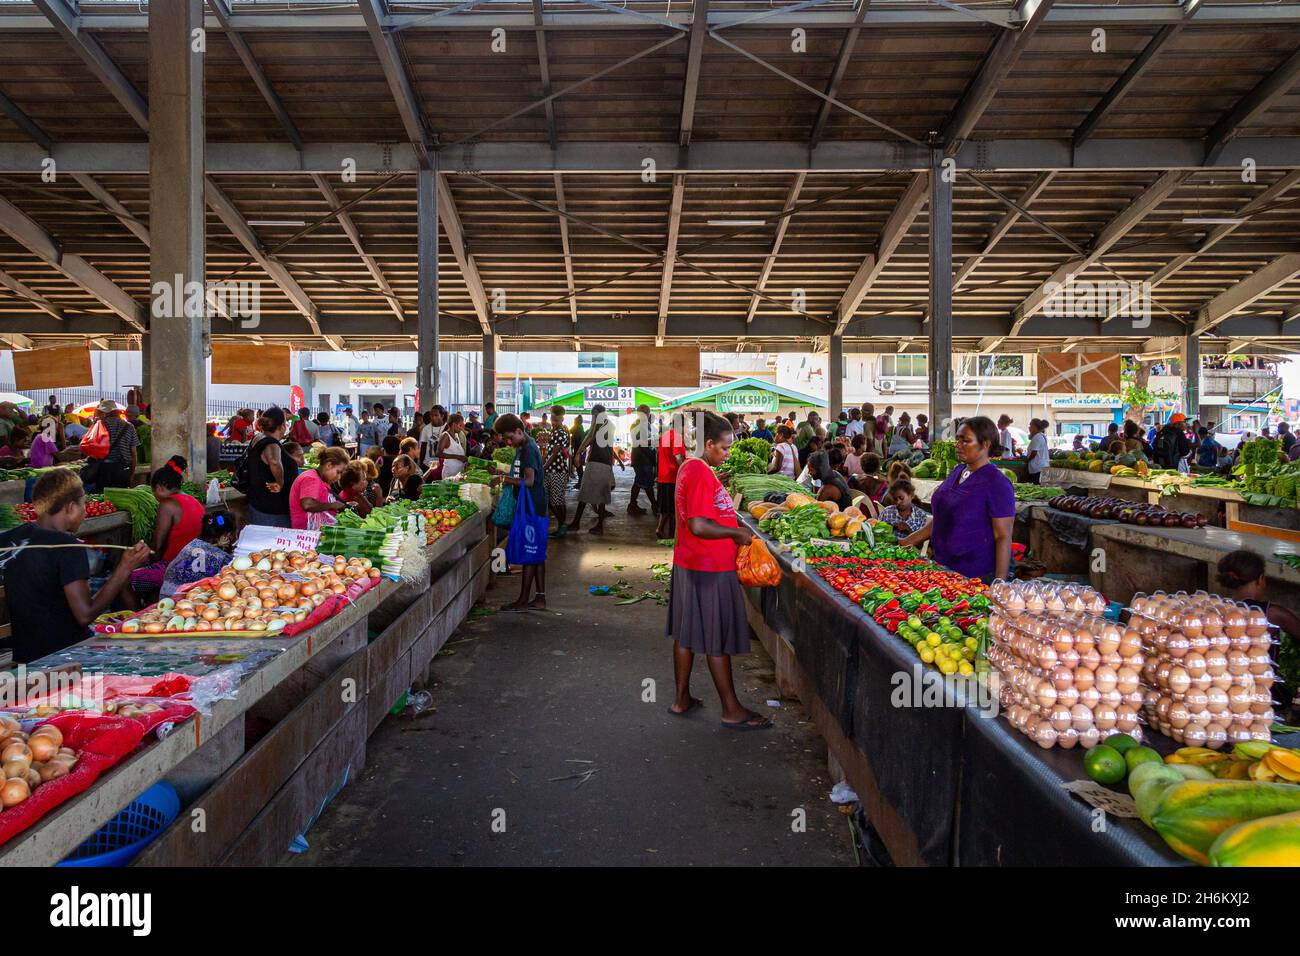 HONIARA, SOLOMON ISLANDS - Jan 11, 2016: Locals browse aisles of fresh produce being sold in the main building of Honiara Central Market, the largest Stock Photo